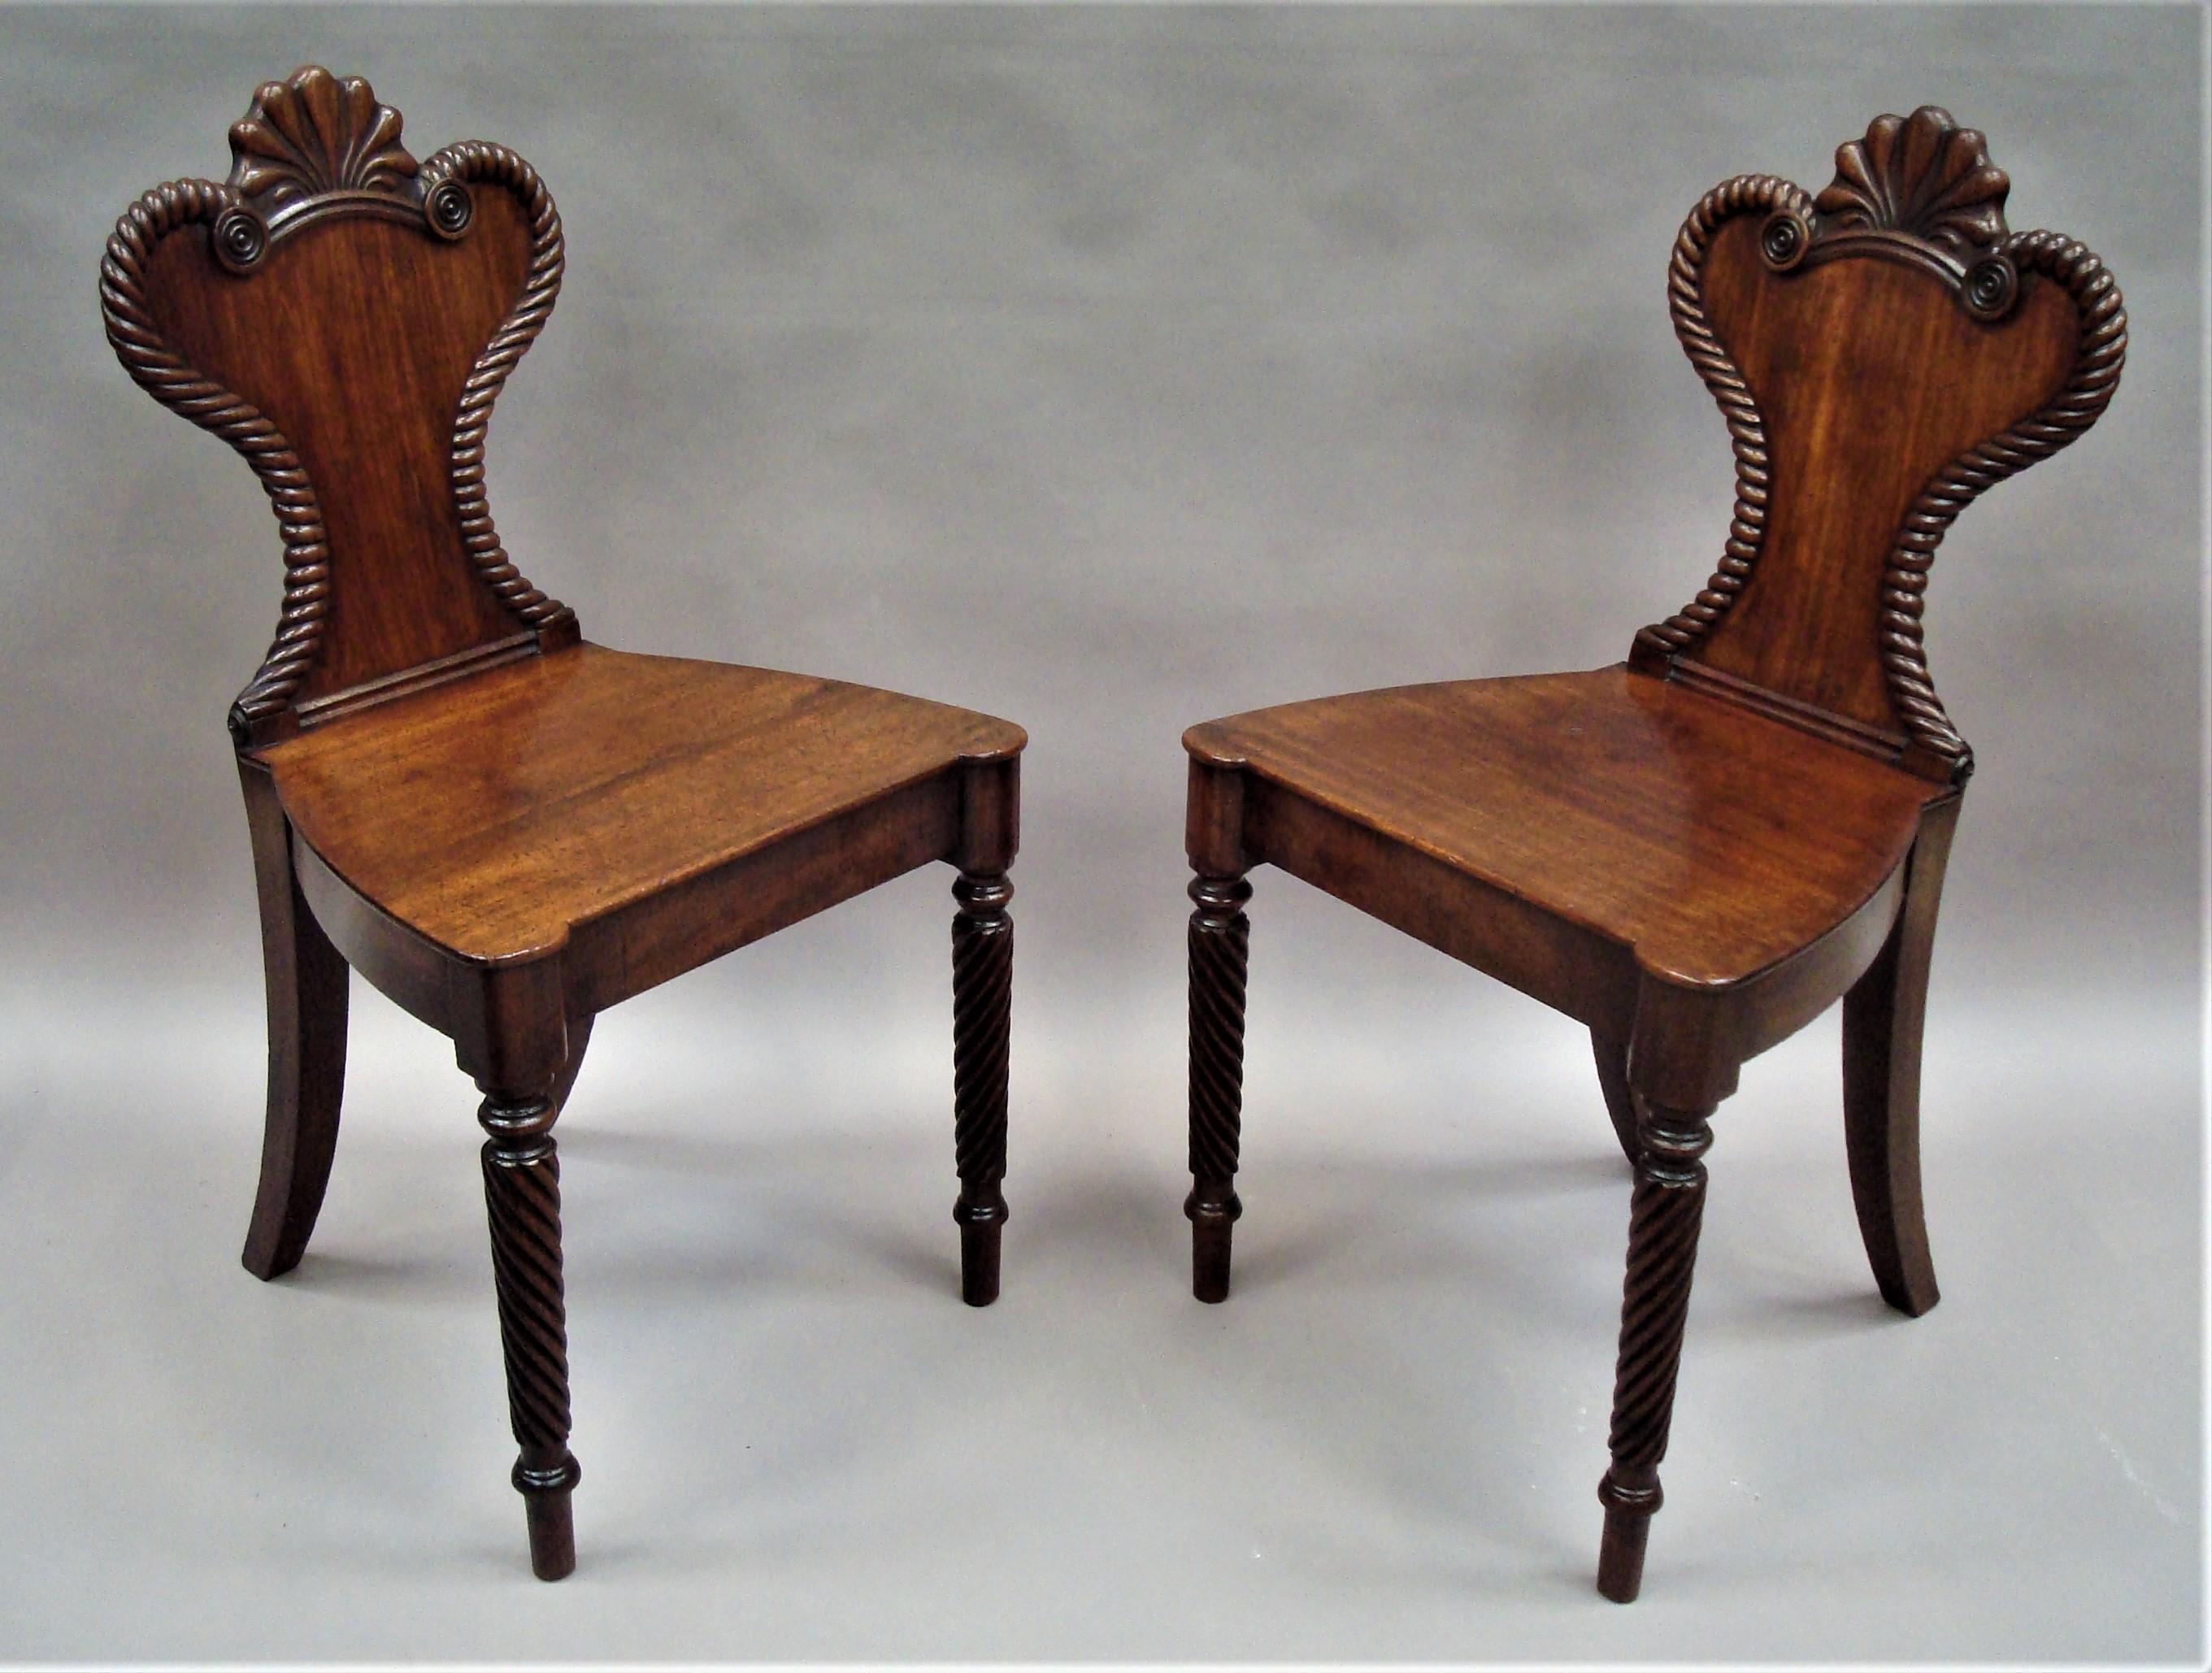 Regency Pair of Mahogany Hall Chairs In Good Condition For Sale In Moreton-in-Marsh, Gloucestershire